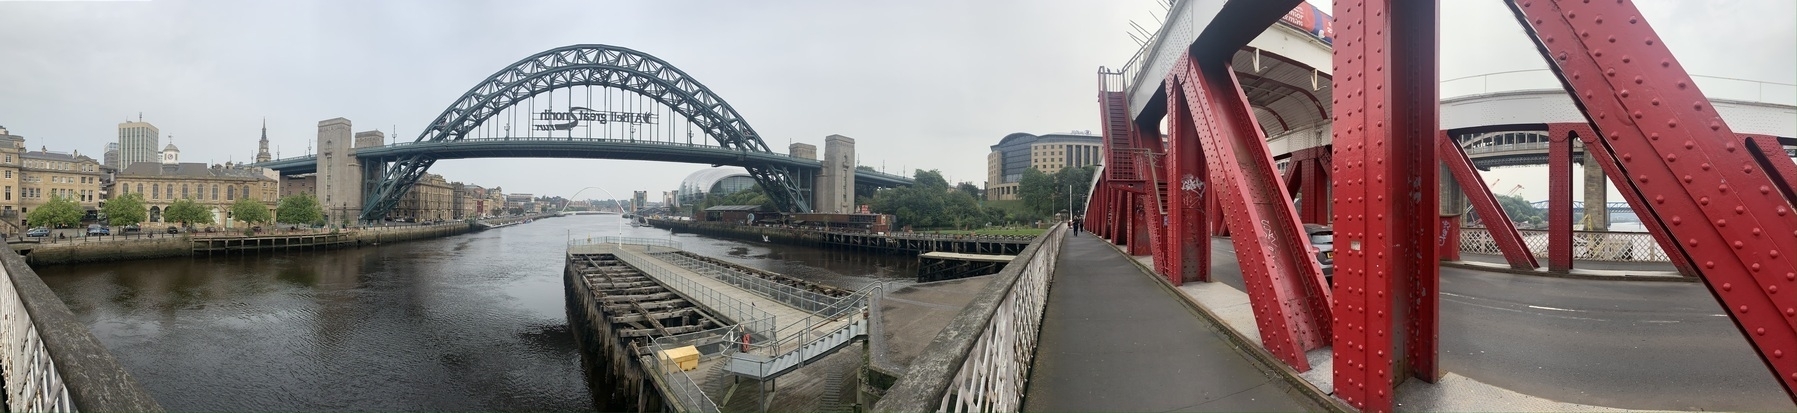 Panorama of the river Tyne with landmarks of the Newcastle and Gateshead quaysides.